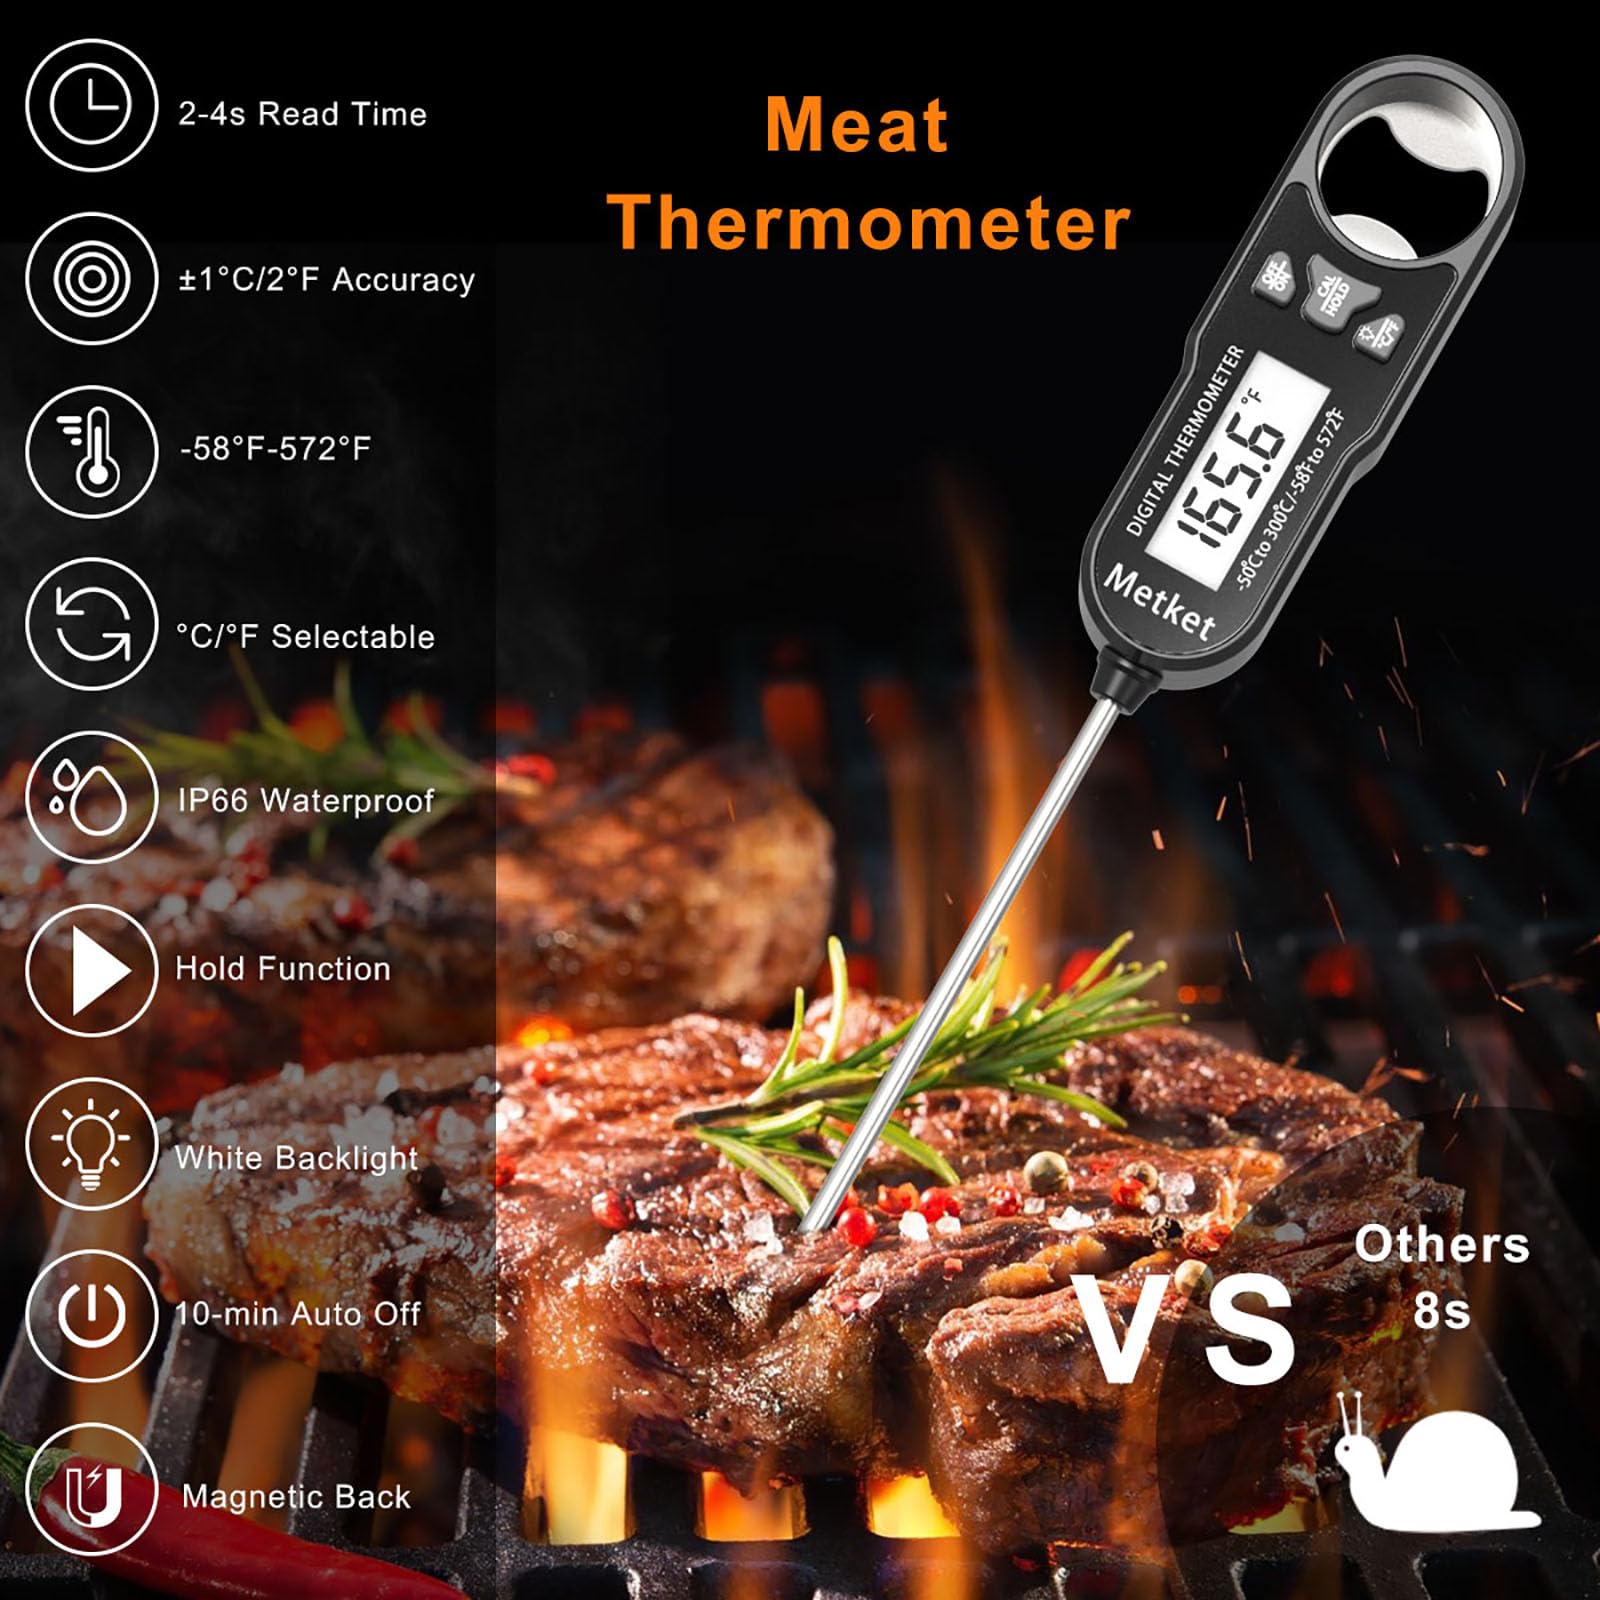 MetKet Waterproof Digital Food Thermometer 2 Pack, Instant Read Meat Thermometer for Cooking and Baking, Long Probe Thermometer for Grill BBQ Smoker Oven Oil Milk Candy Wine Thermometer